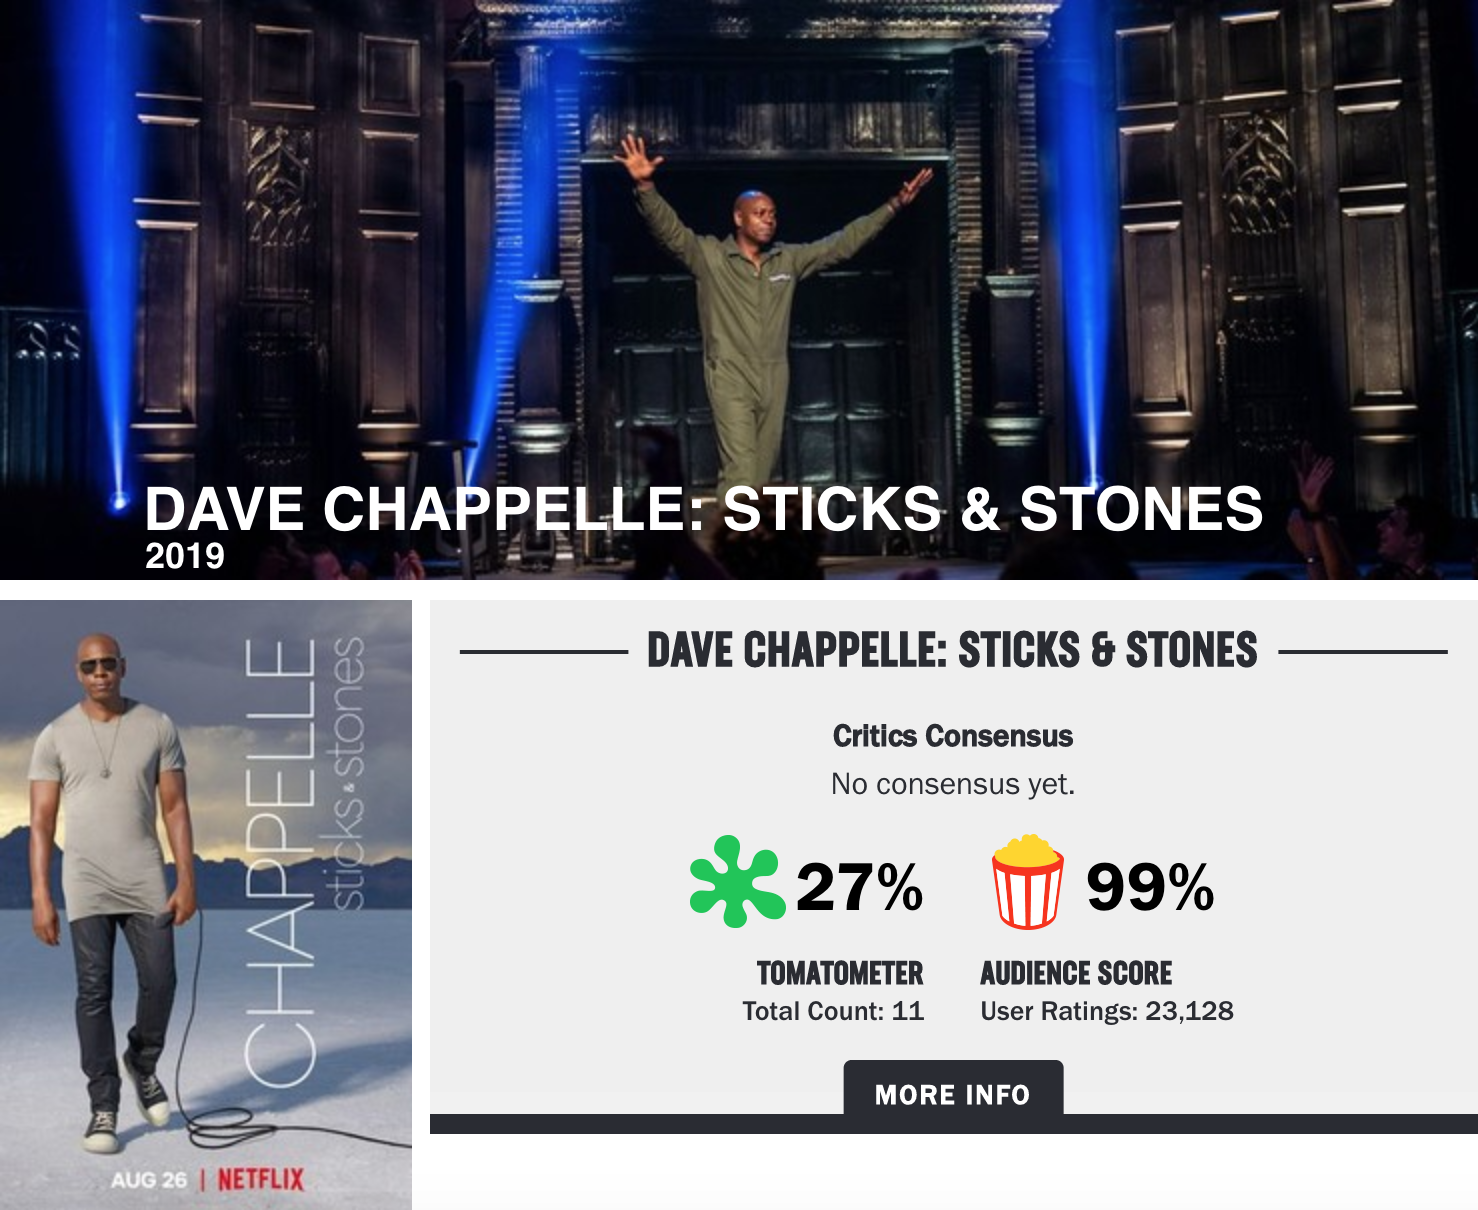 Dave Chappelle - Dave Chappelle Sticks & Stones 2019 Dave Chappelle Sticks & Stones Critics Consensus No consensus yet. sticks stones Chappelle 27% U 99% Tomatometer Total Count 11 Audience Score User Ratings 23,128 More Info Cavo 26 I Netflix